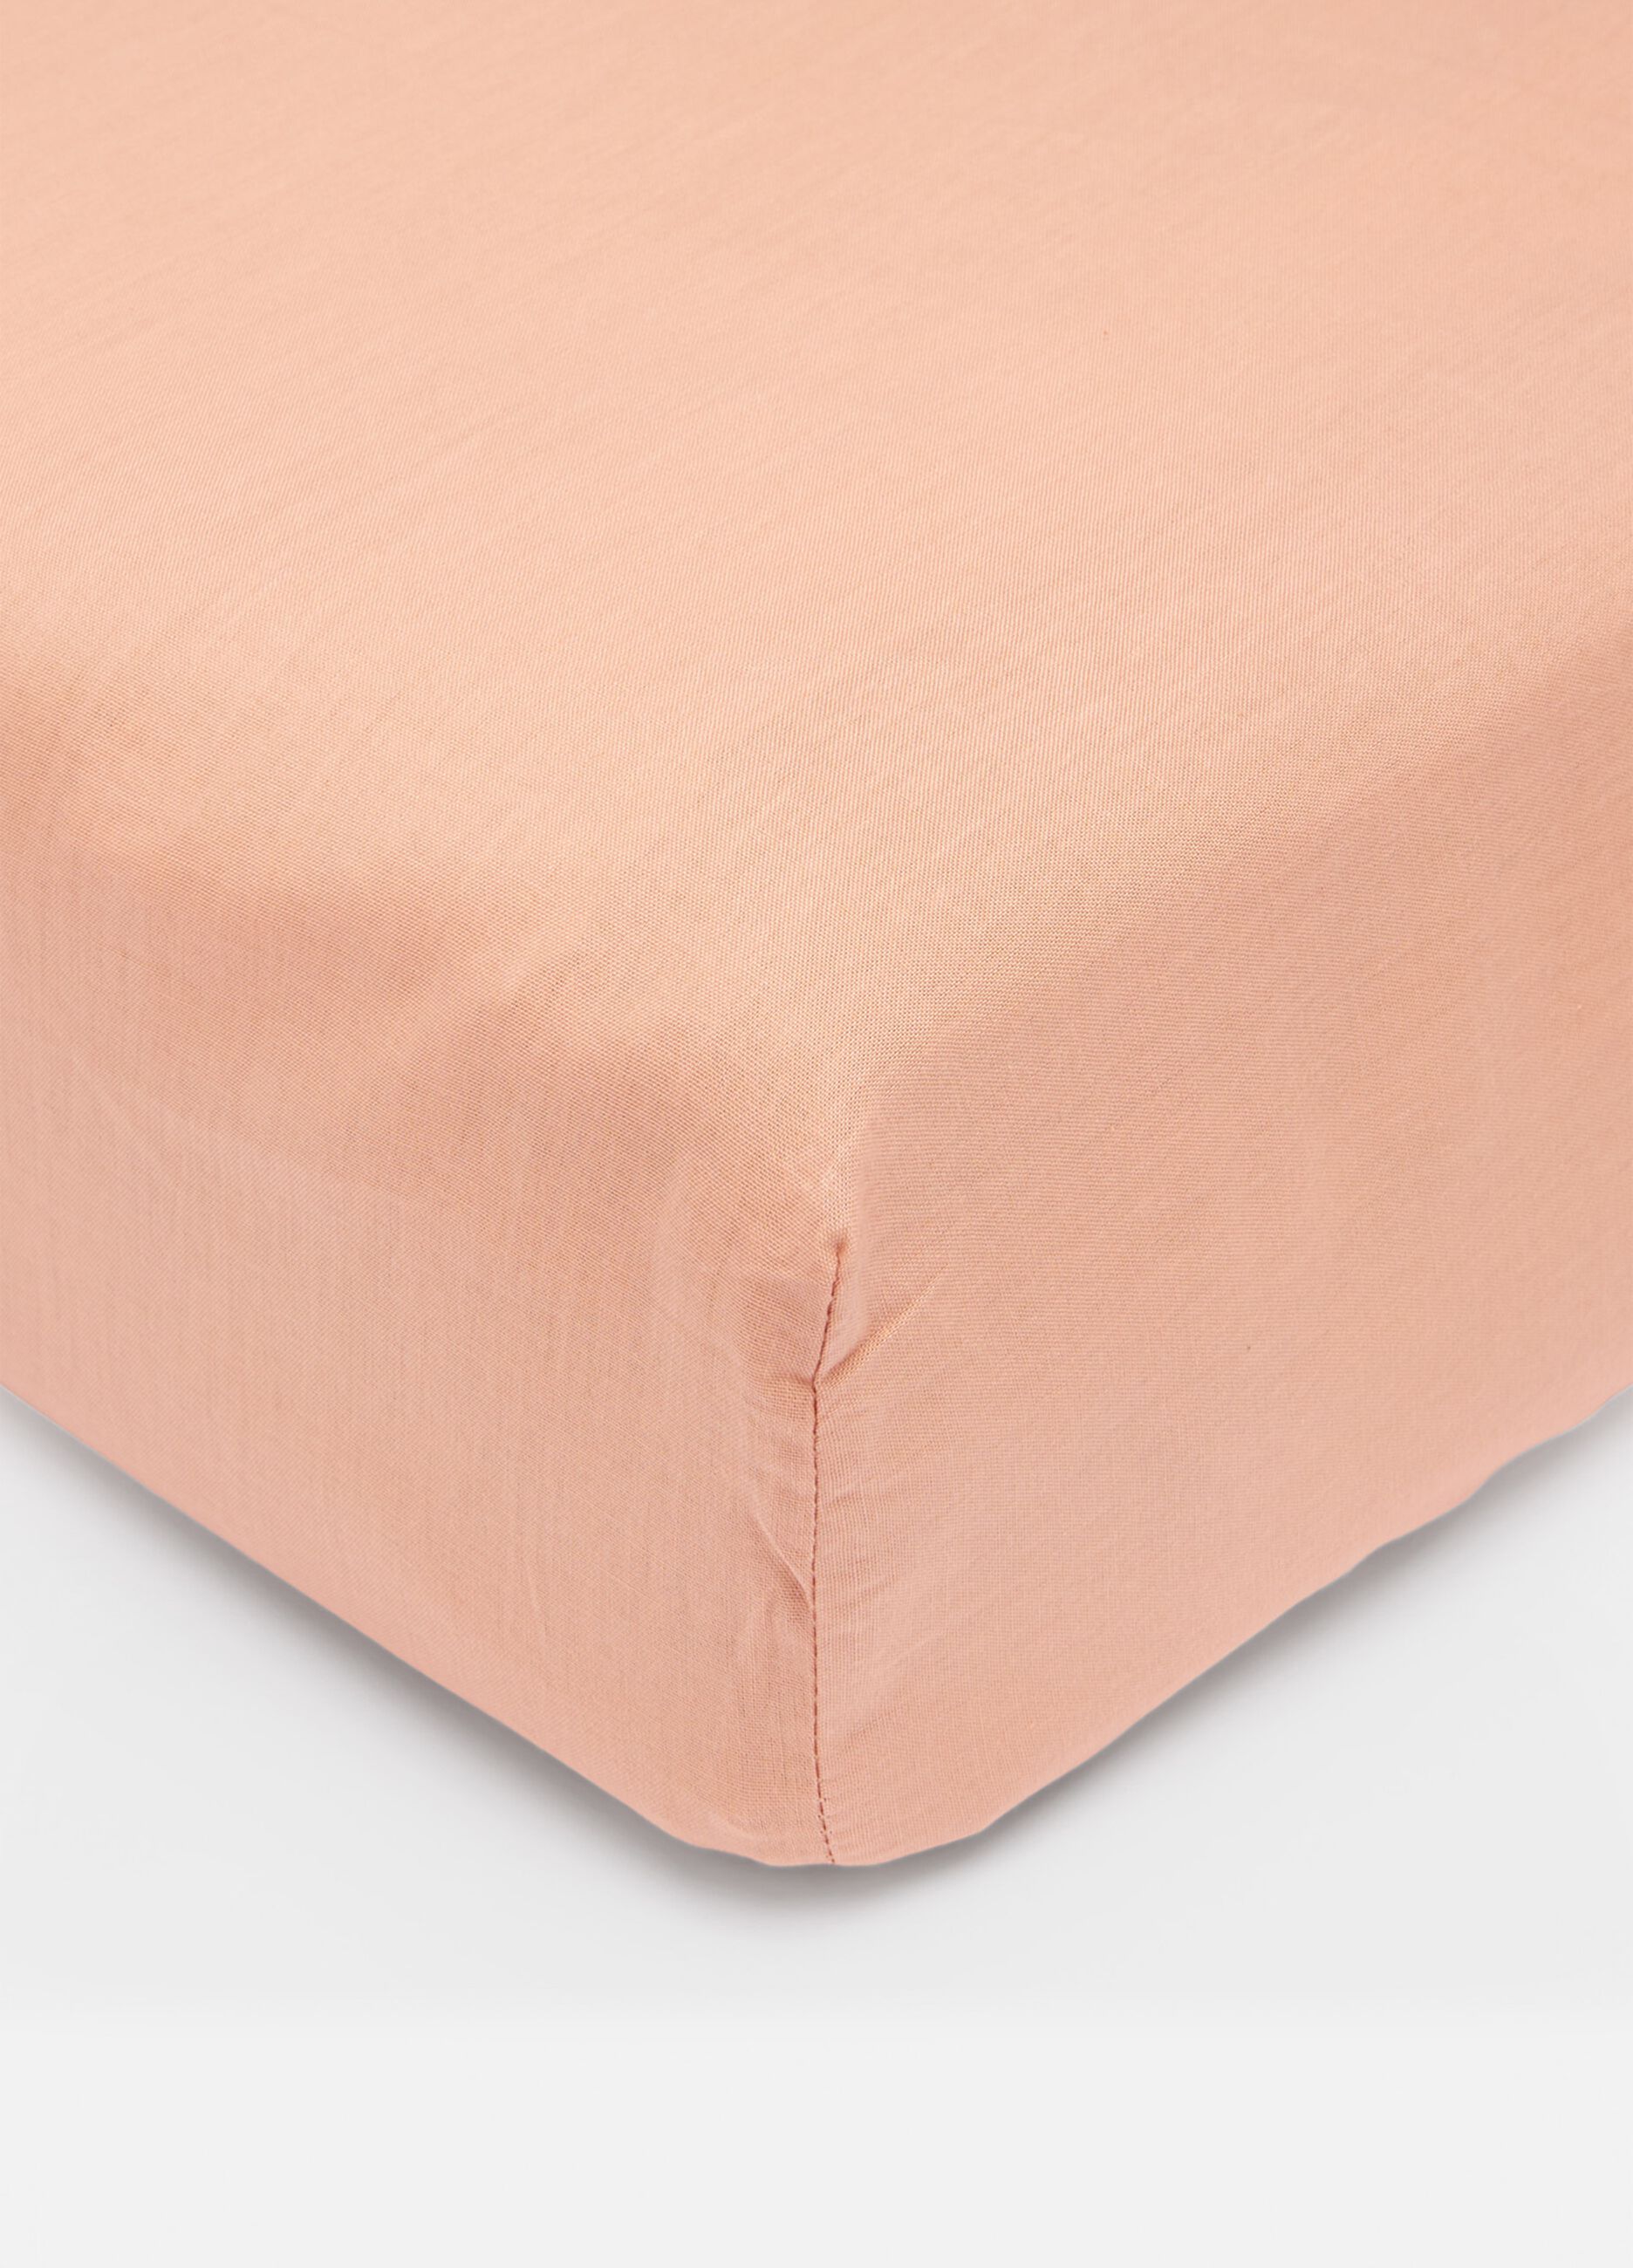 Fitted sheet for double bed in 100% cotton